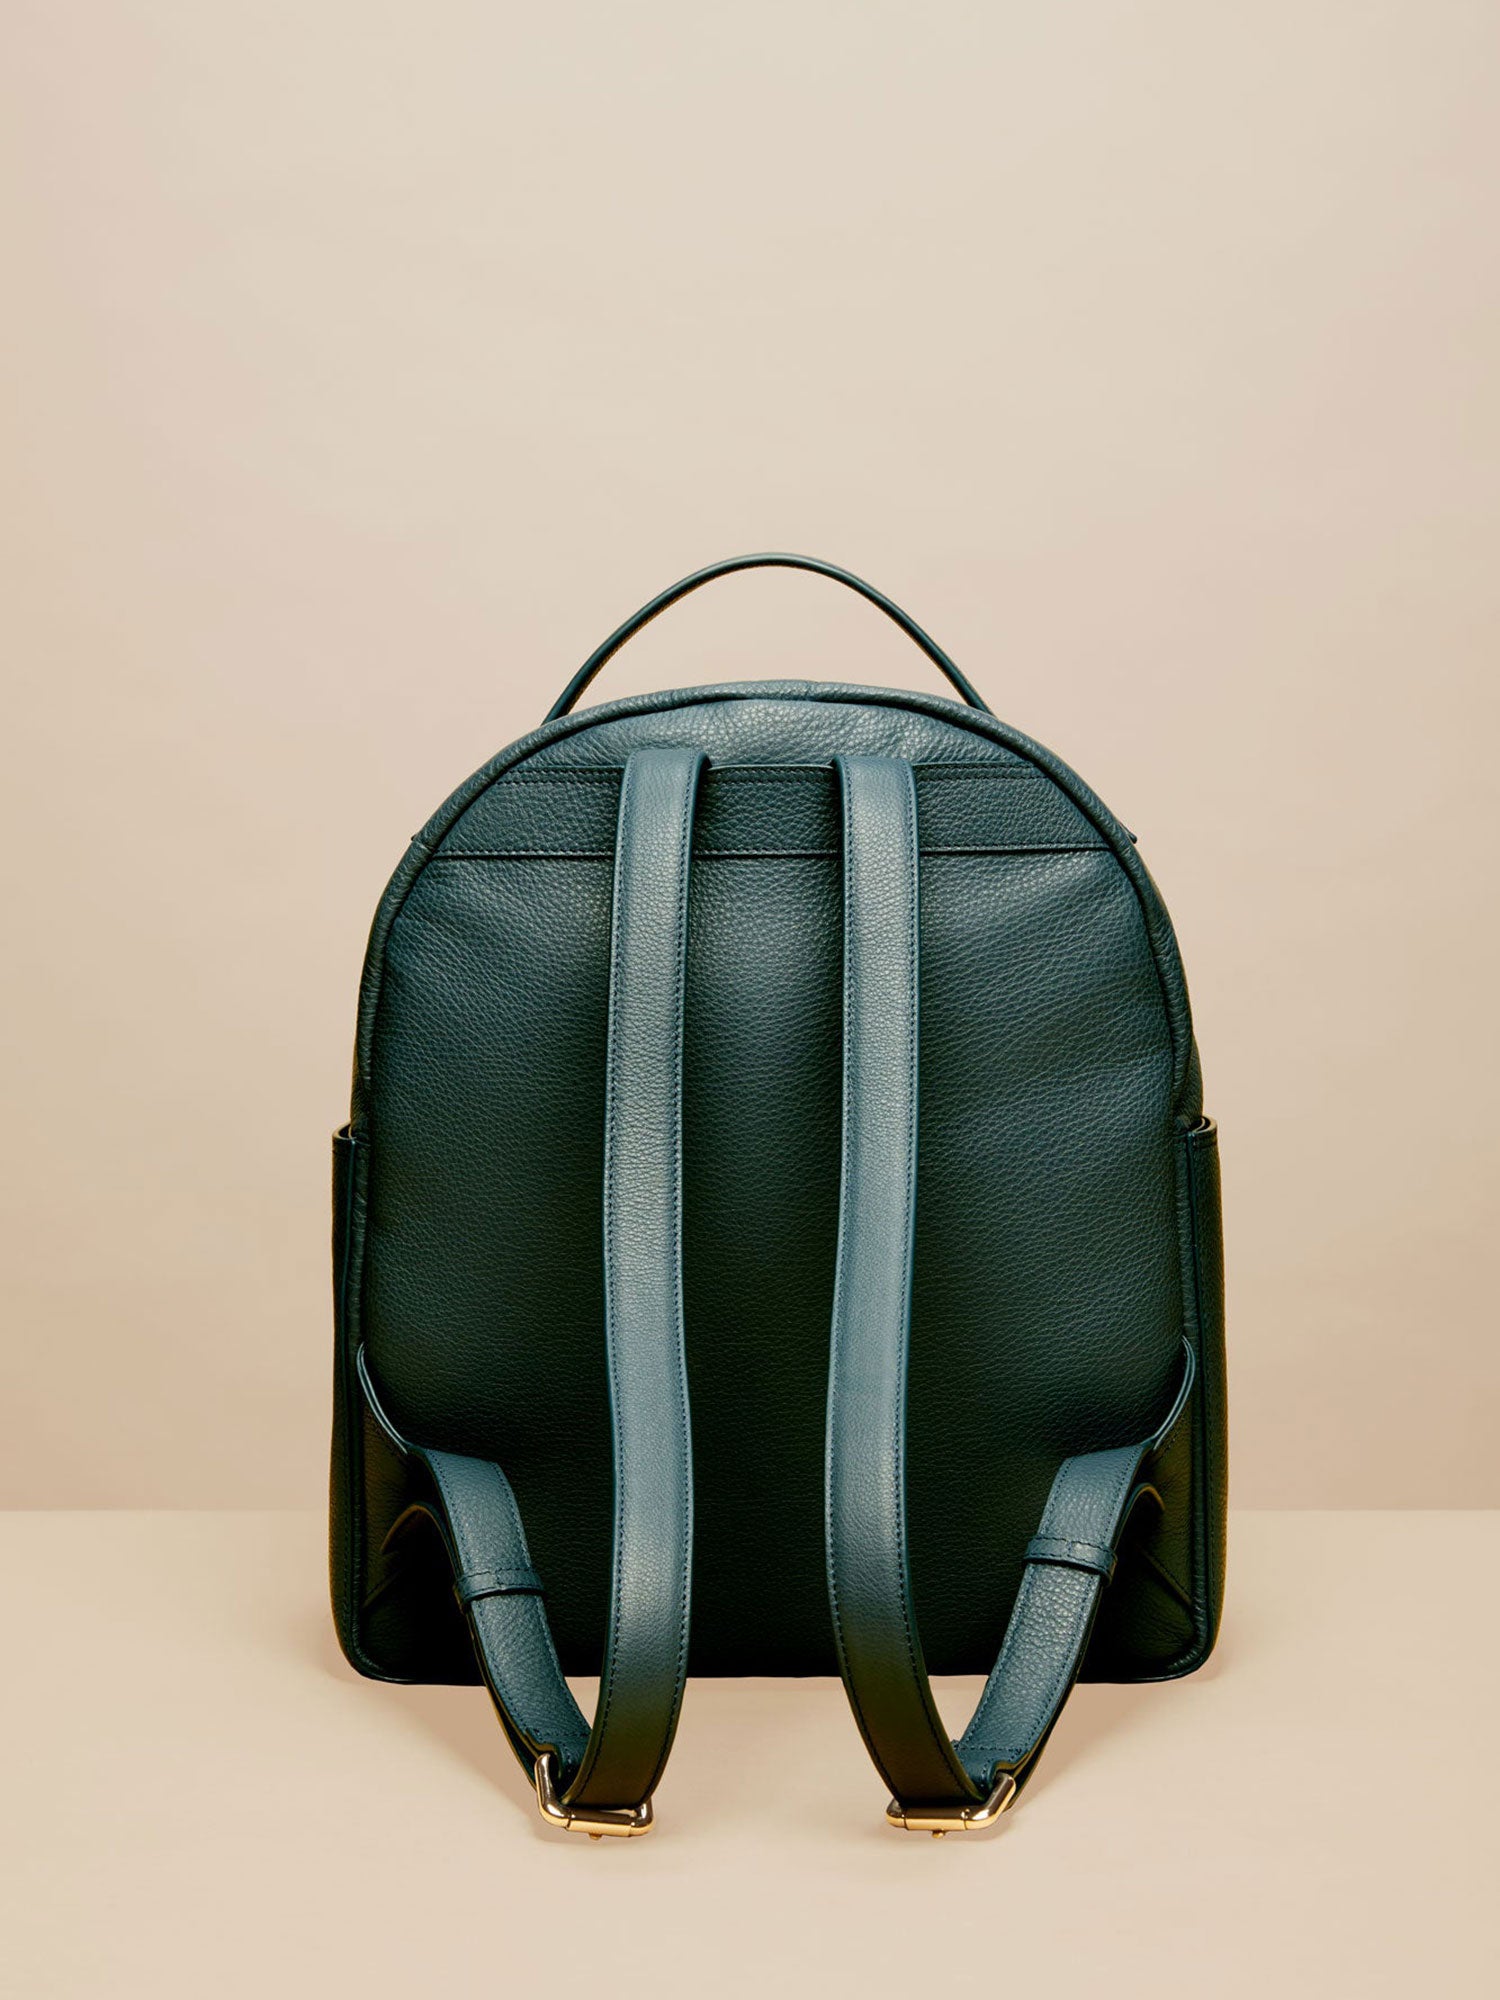 The Midi Nomad Backpack